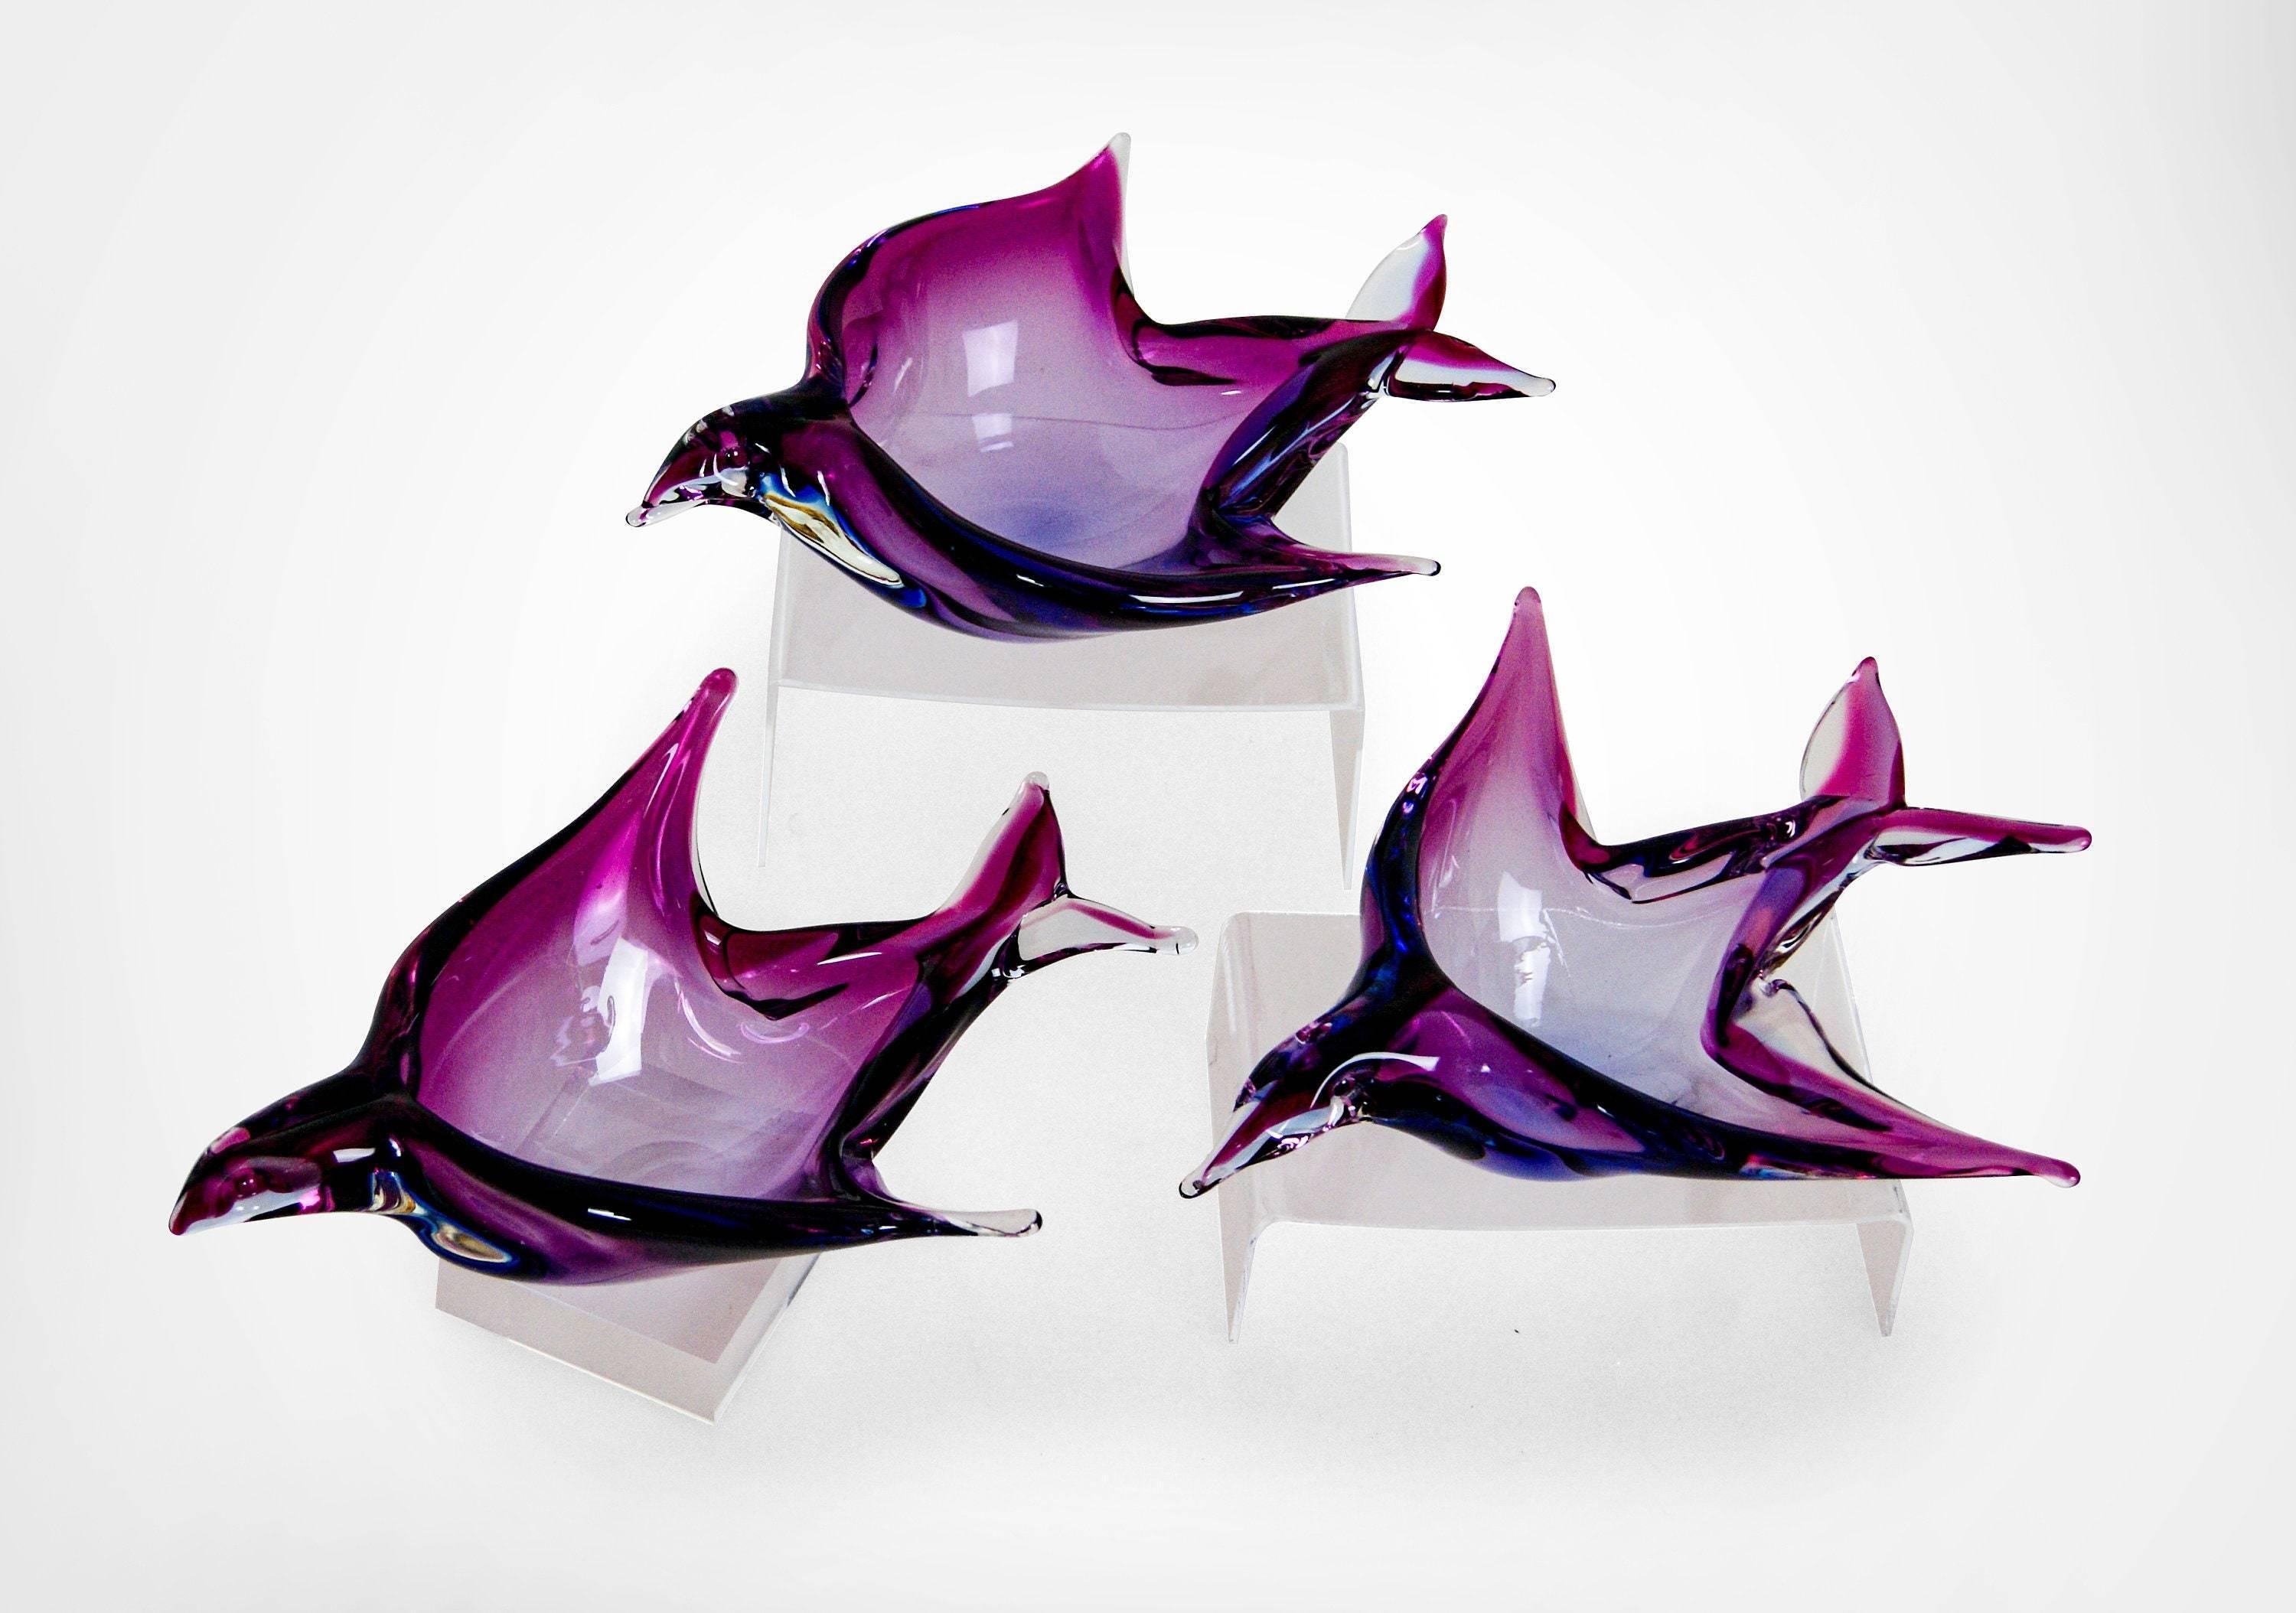 Set of 3 Mid-Century Murano Sommerso glass bird sculptural bowls..
Attributed to master glass artisan Flavio Poli for Seguso.
Thick walled pink and purple glass sculptural bowls in the form of birds mid flight.
Abstract and unusual.
In very good